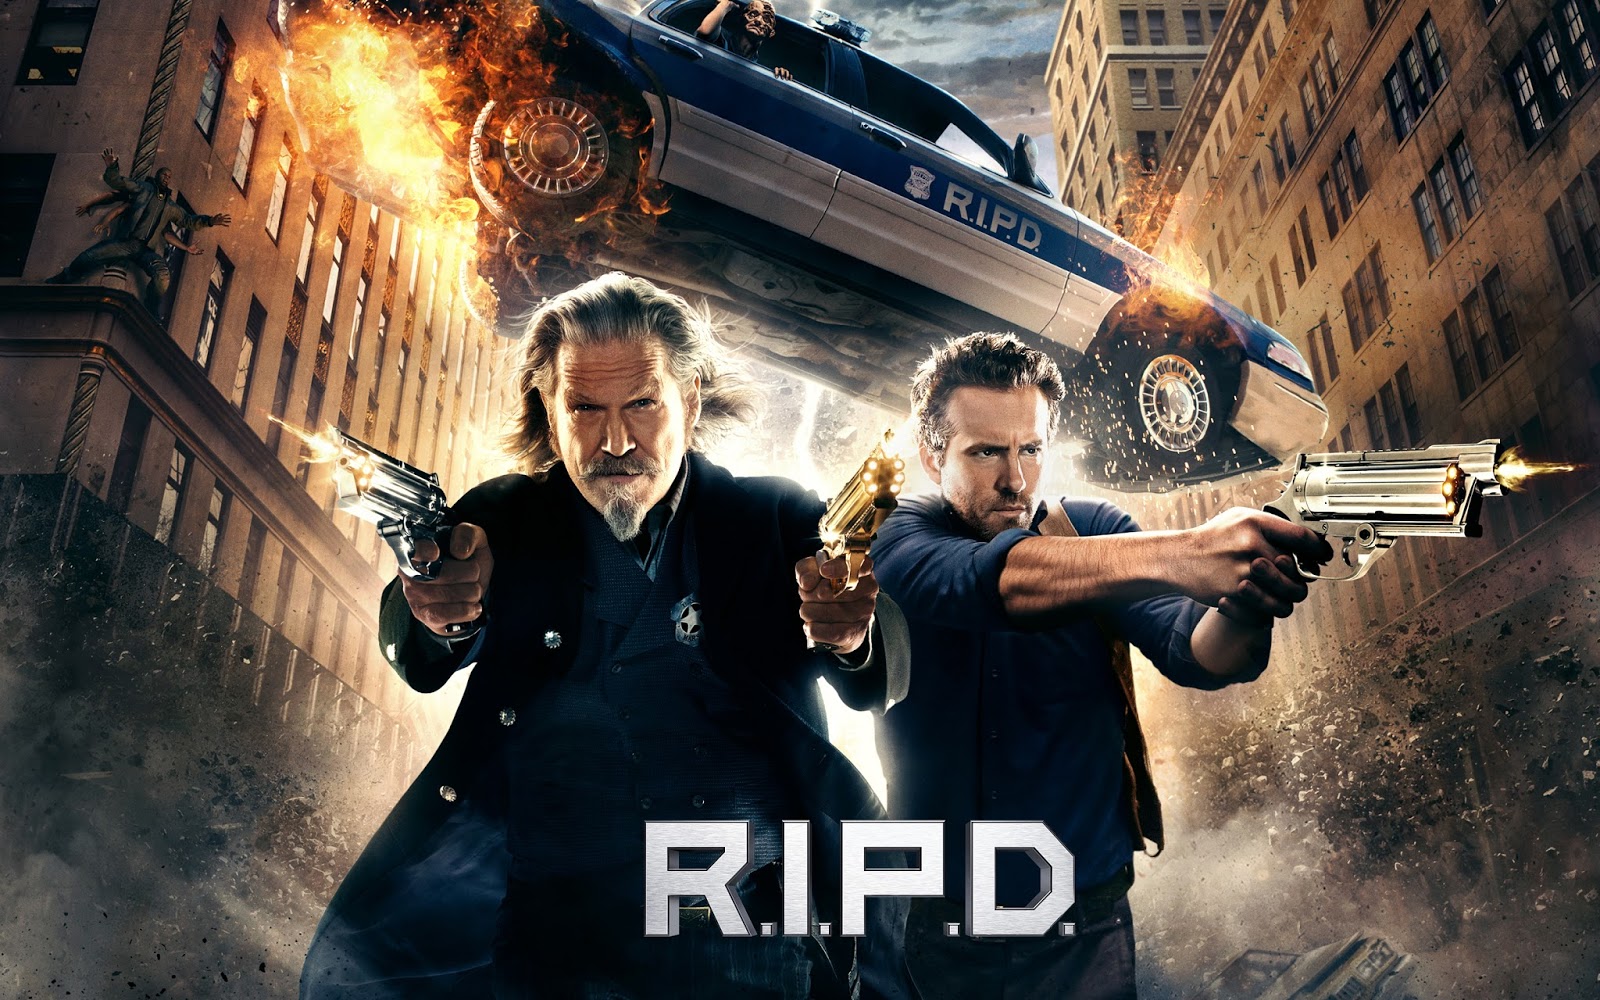 R.I.P.D. (2013) Movie Information & Trailers